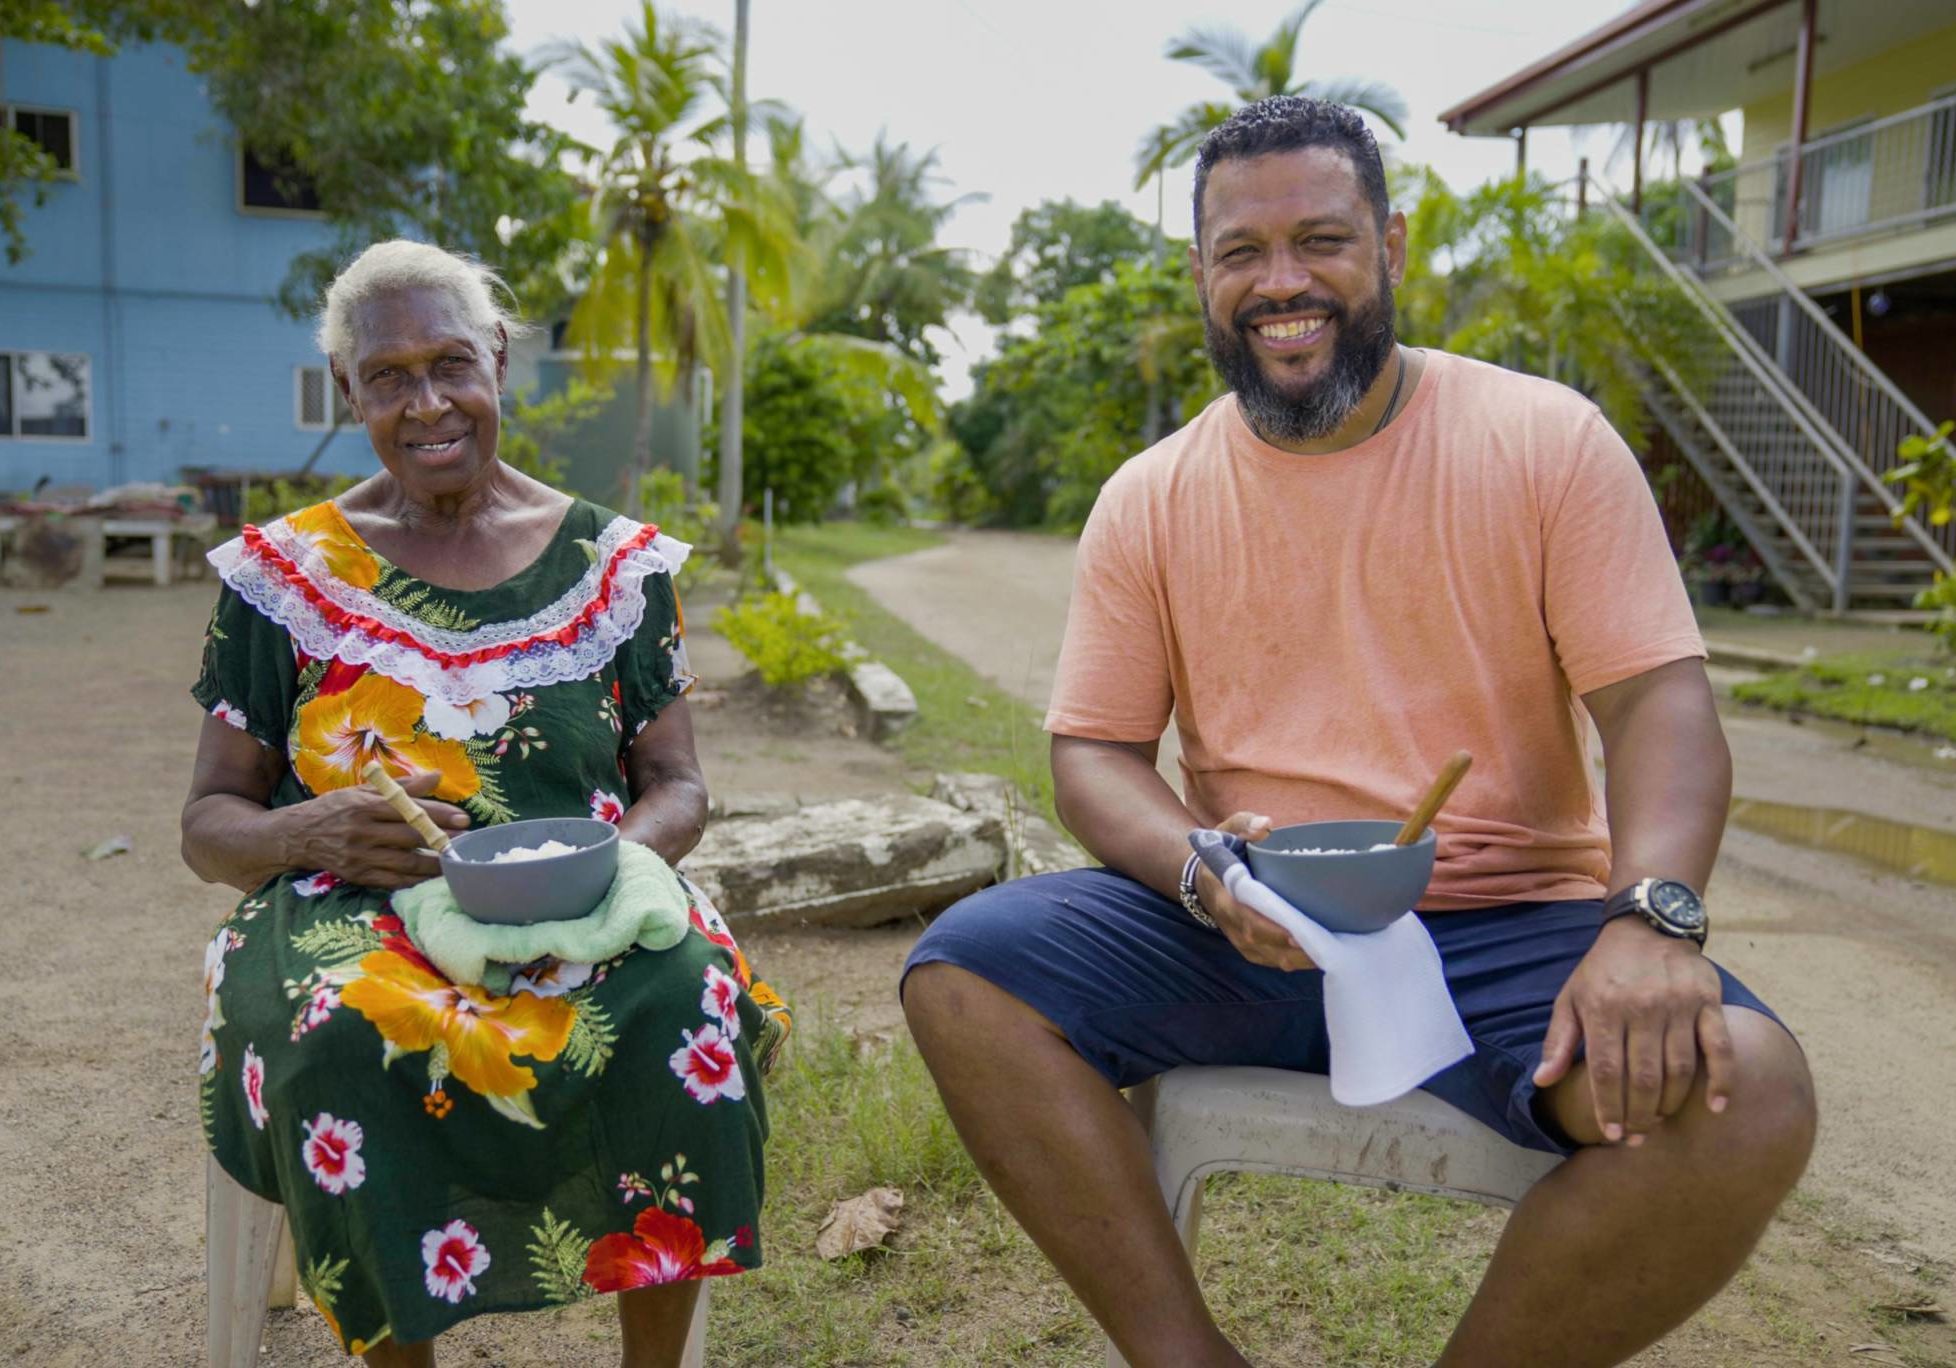 Aaron Fa'Aoso sits outside next to a woman with pots in their hands as part of series STRAIT TO THE PLATE